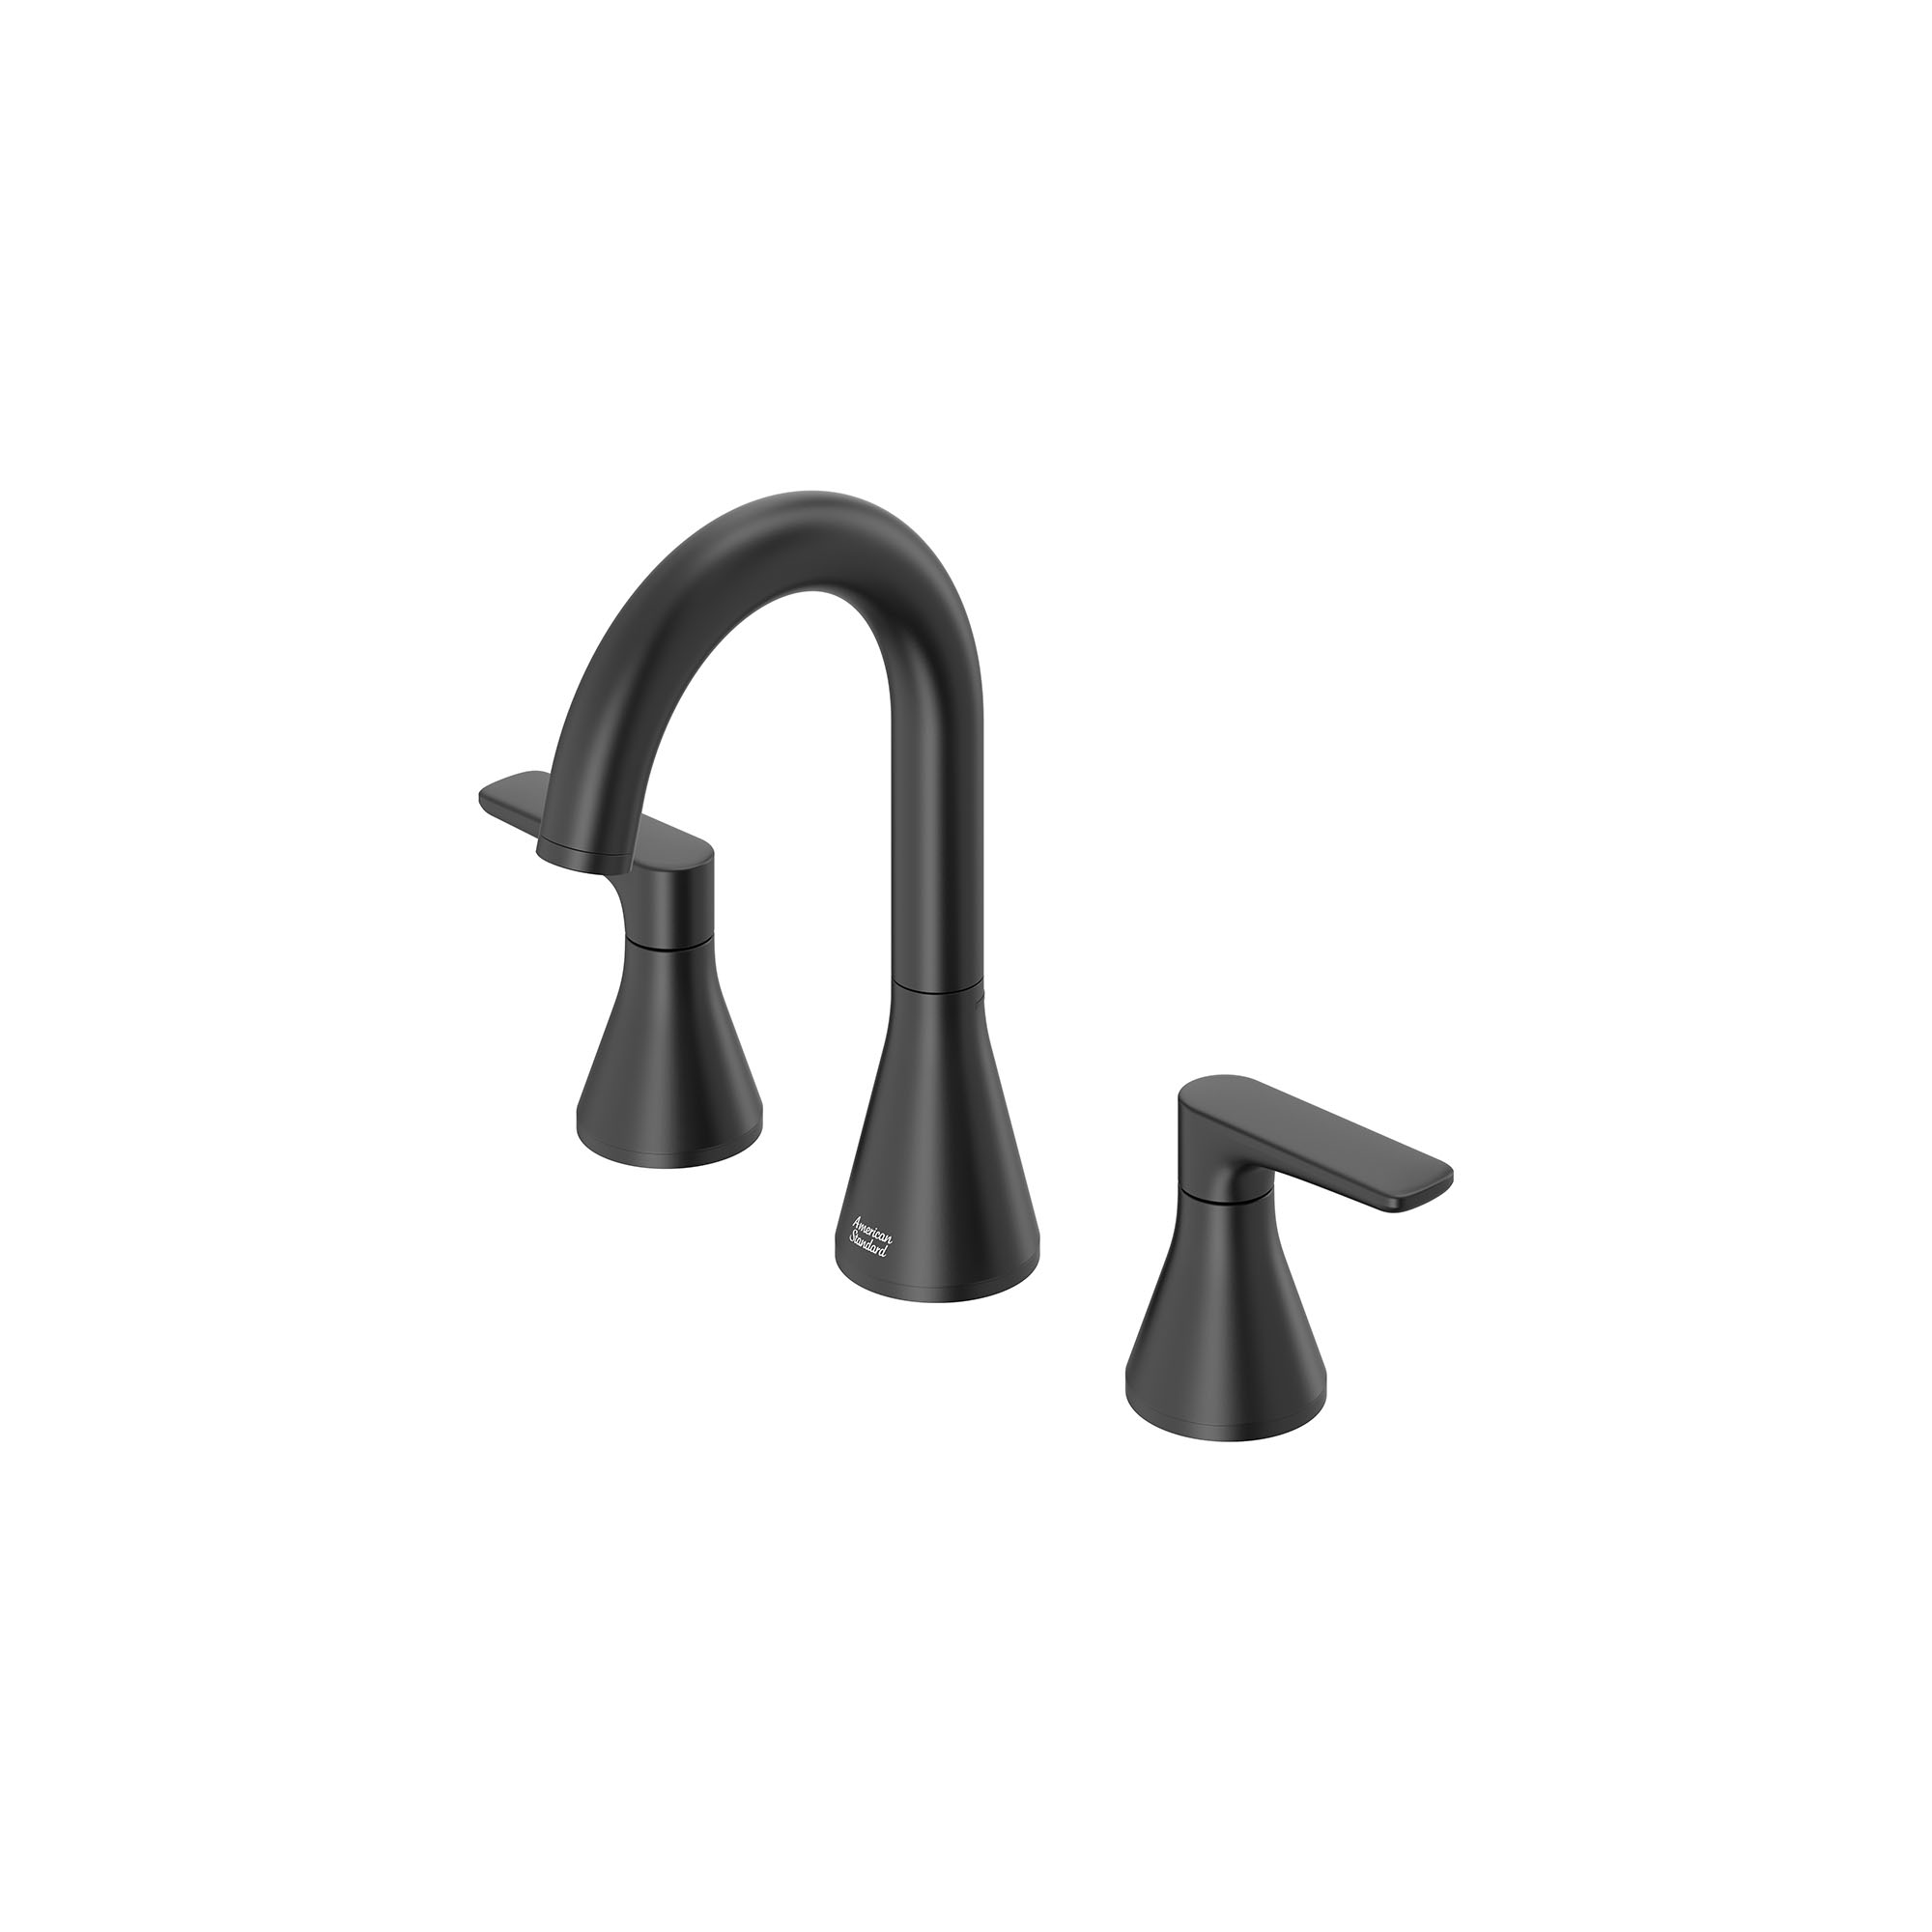 Aspirations™ 8-Inch Widespread 2-Handle Bathroom Faucet 1.2gpm/4.5 L/min With Lever Handles